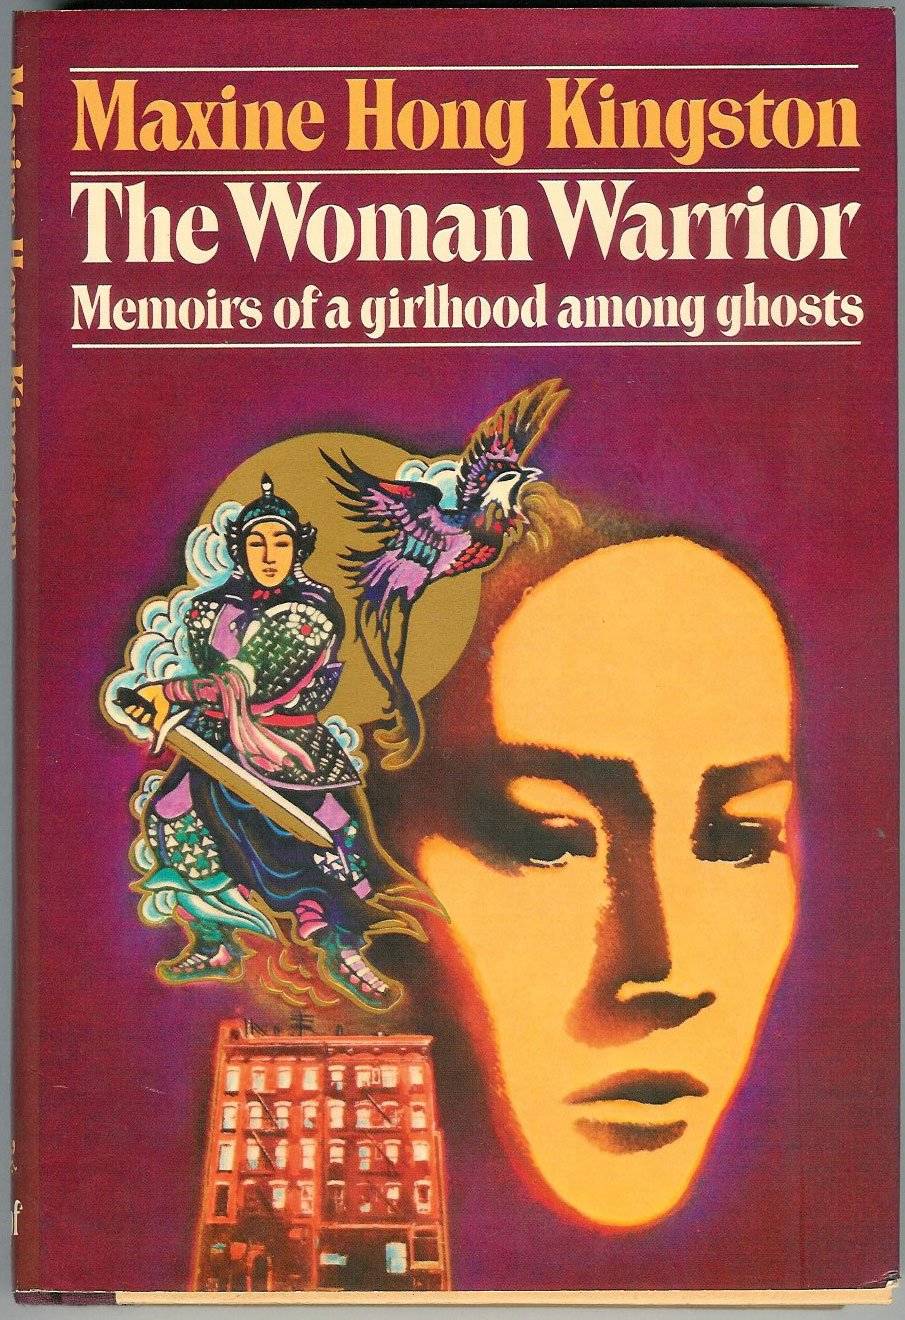 Burgundy "Woman Warrier" book cover featuring a collage of images such as woman's face, a warrior, and a building.